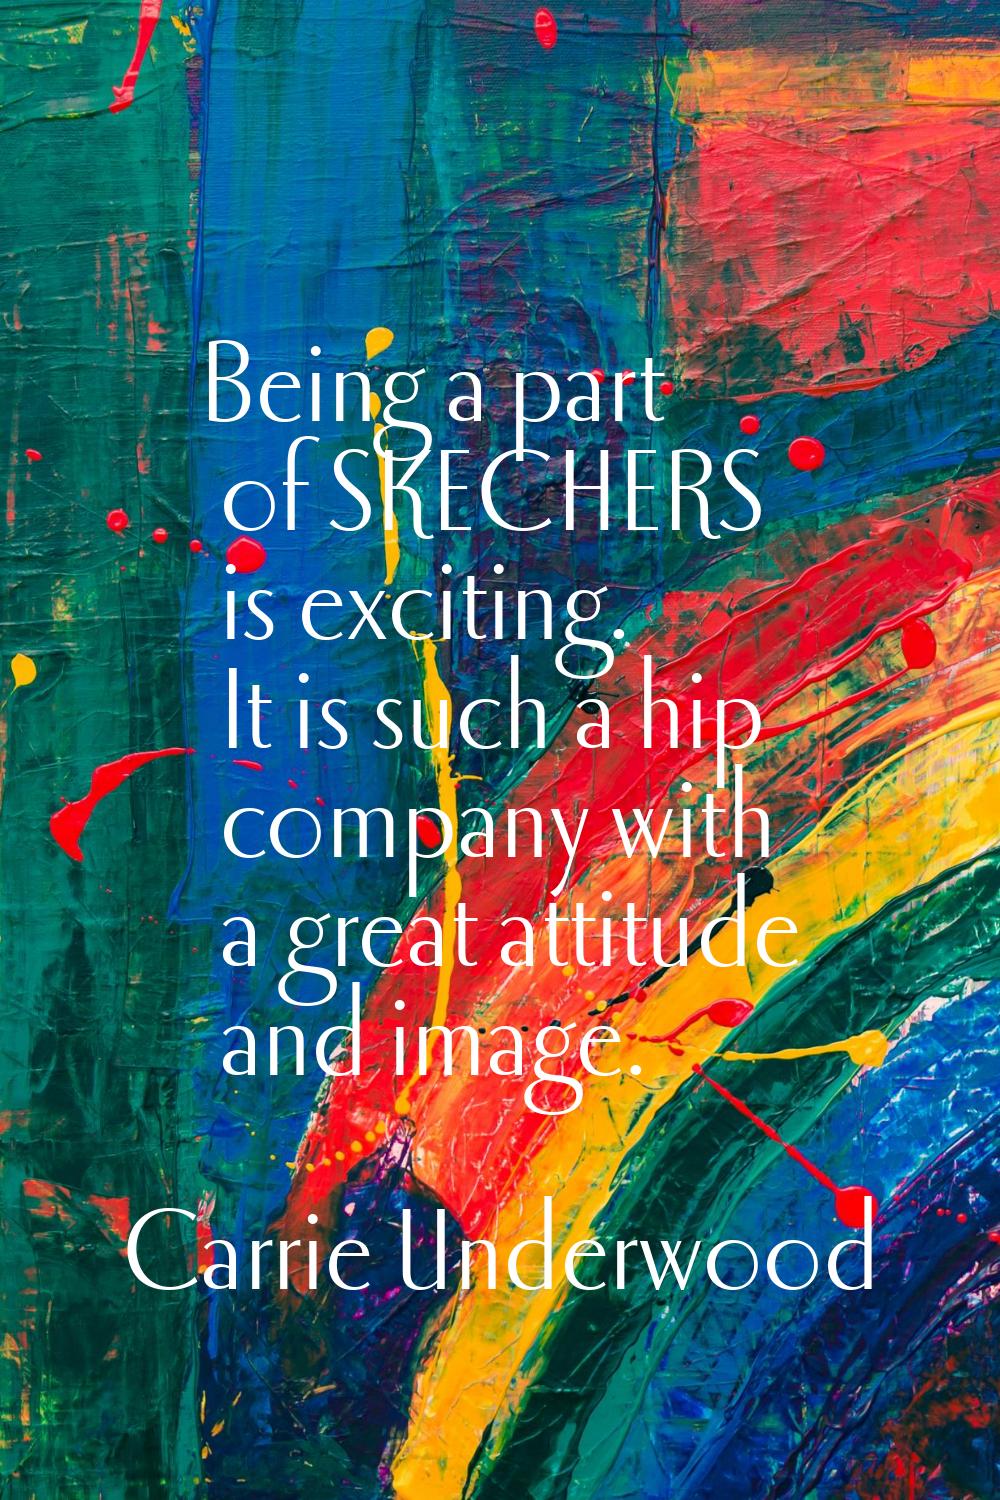 Being a part of SKECHERS is exciting. It is such a hip company with a great attitude and image.